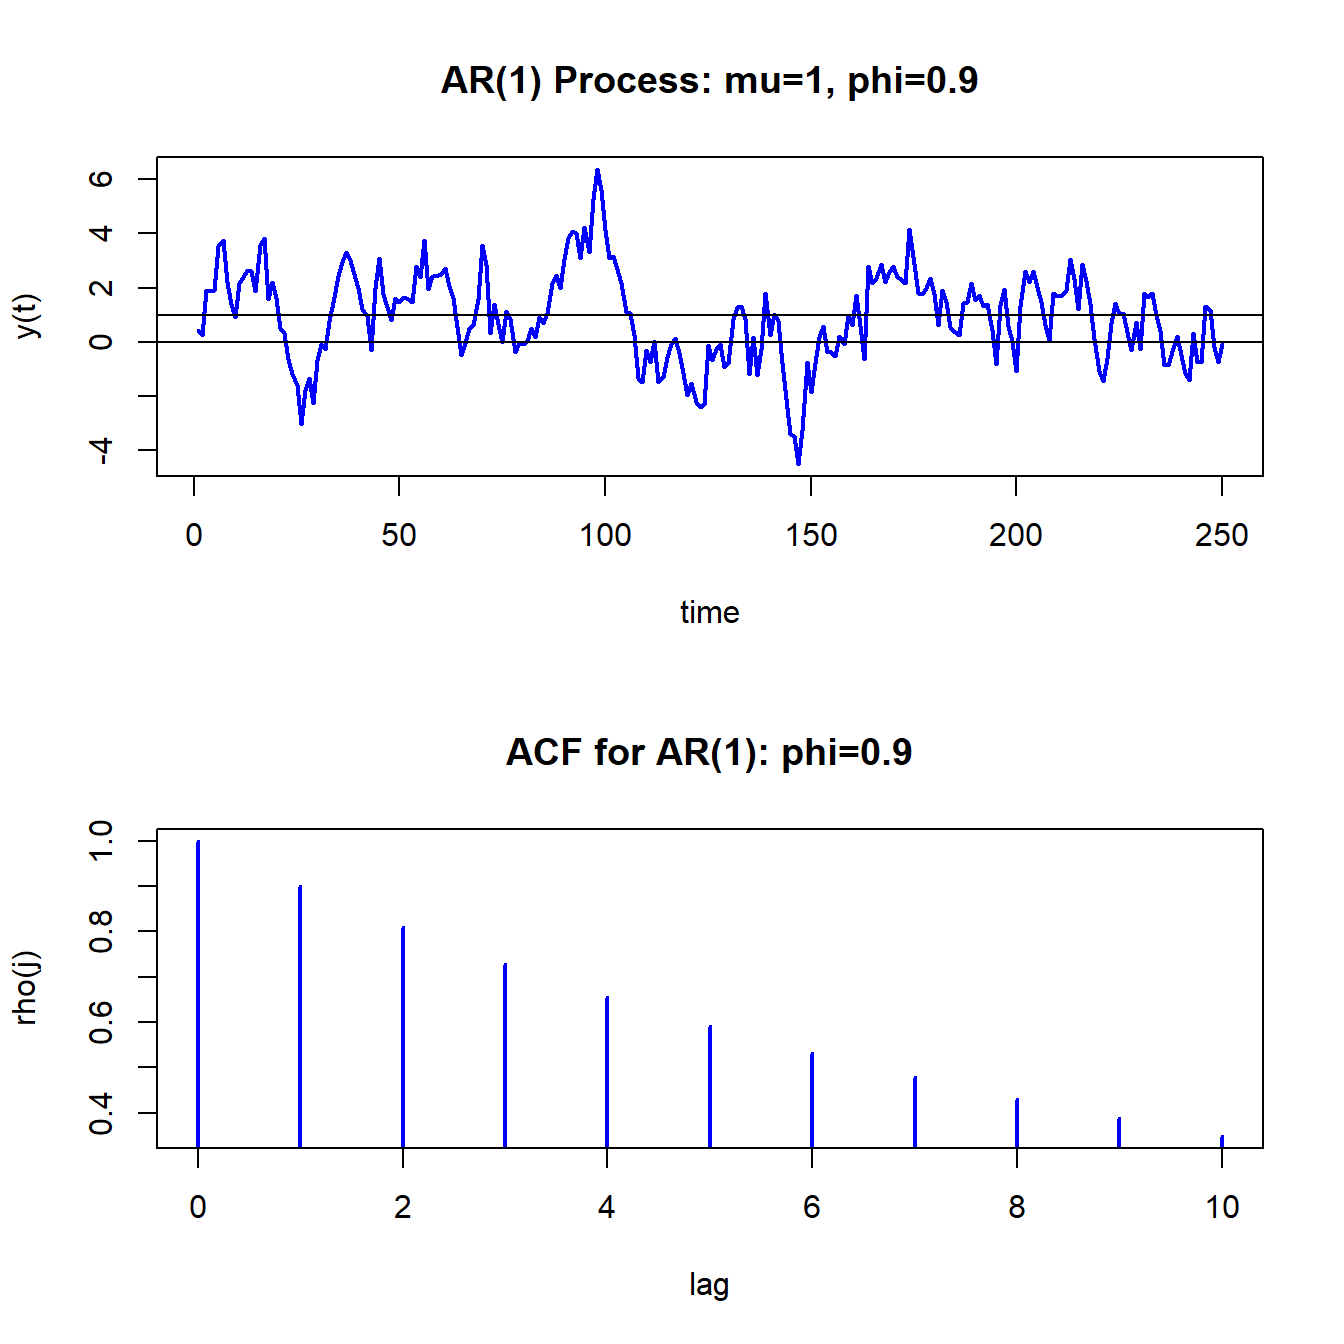 Simulated values and ACF from AR(1) model with $\mu=1,\phi=0.9$ and $\sigma_{\varepsilon}^{2}=1$